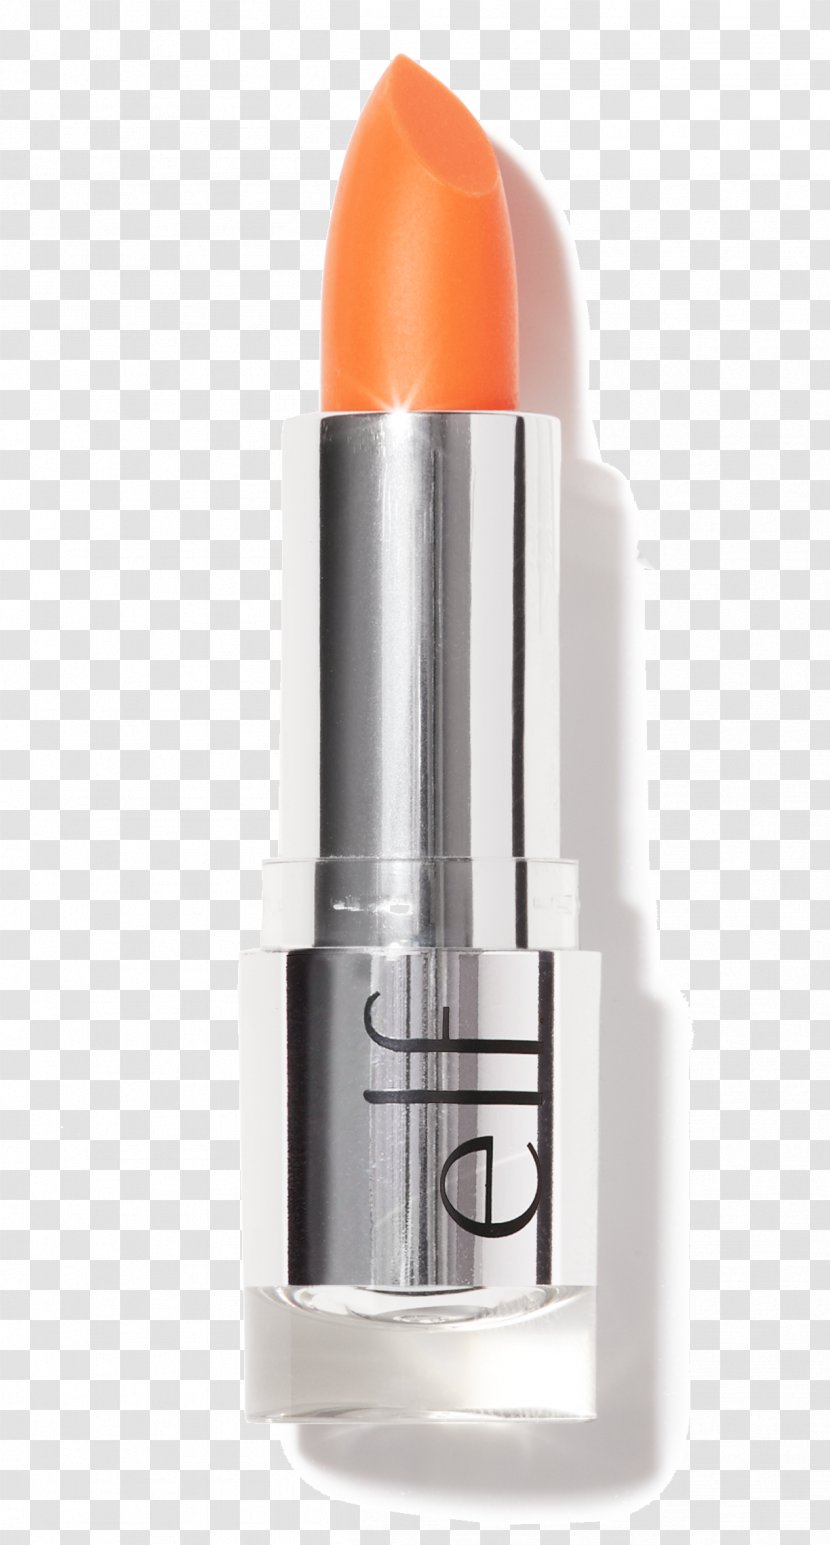 Lipstick Lip Balm Stain Gloss Liner - Care Transparent PNG